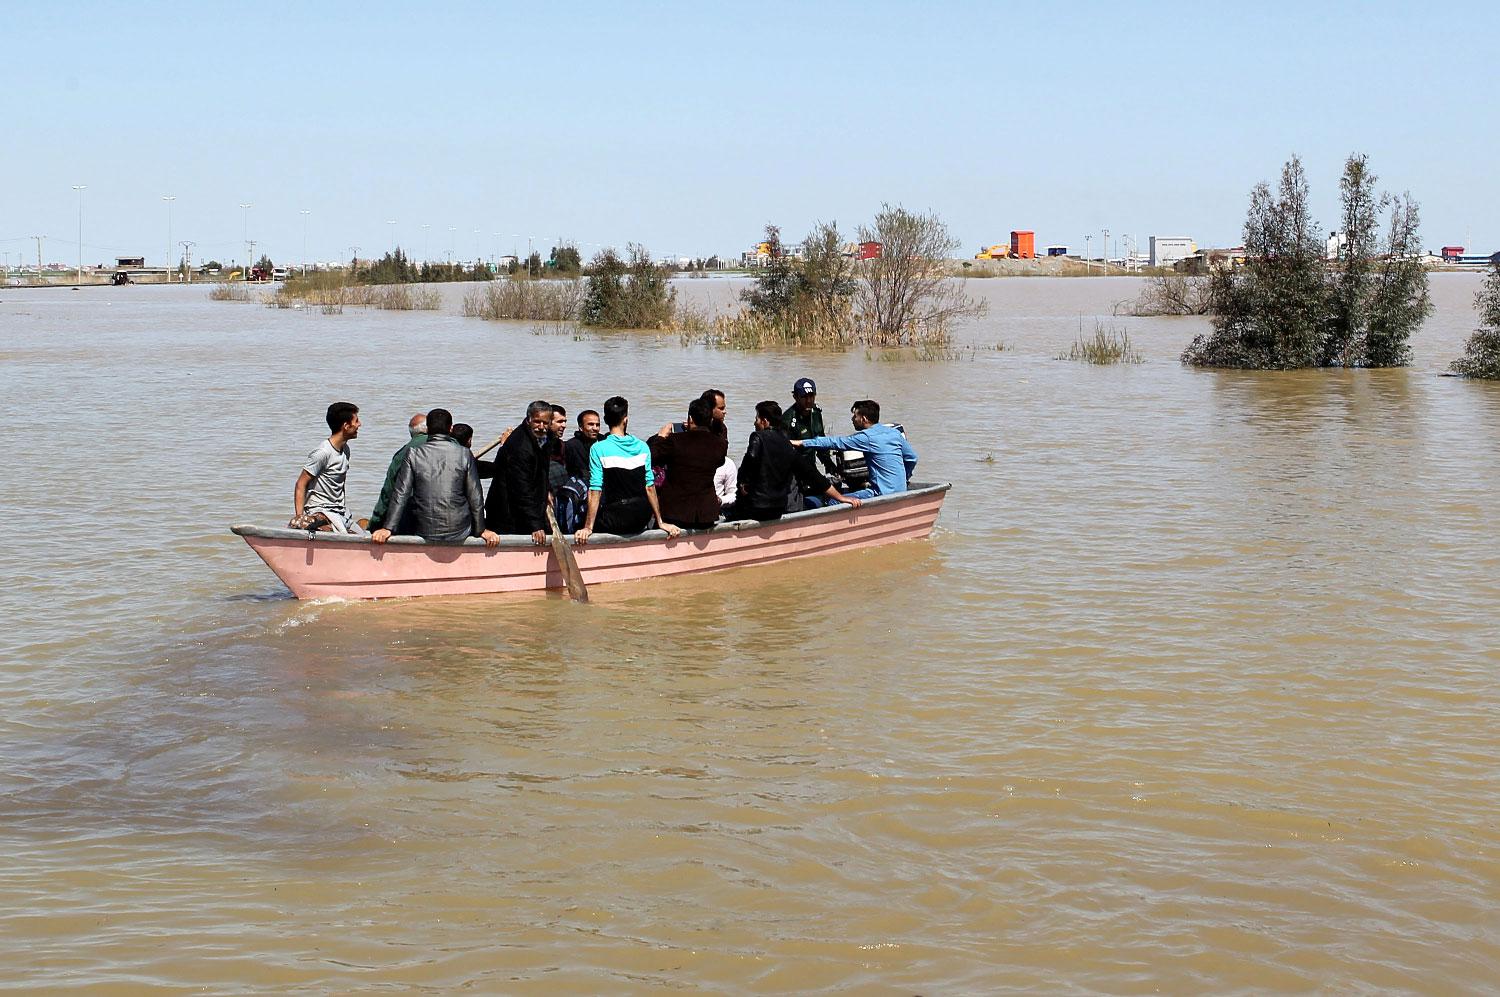 People are seen on a boat after a flooding in Golestan province, Iran, March 24, 2019.